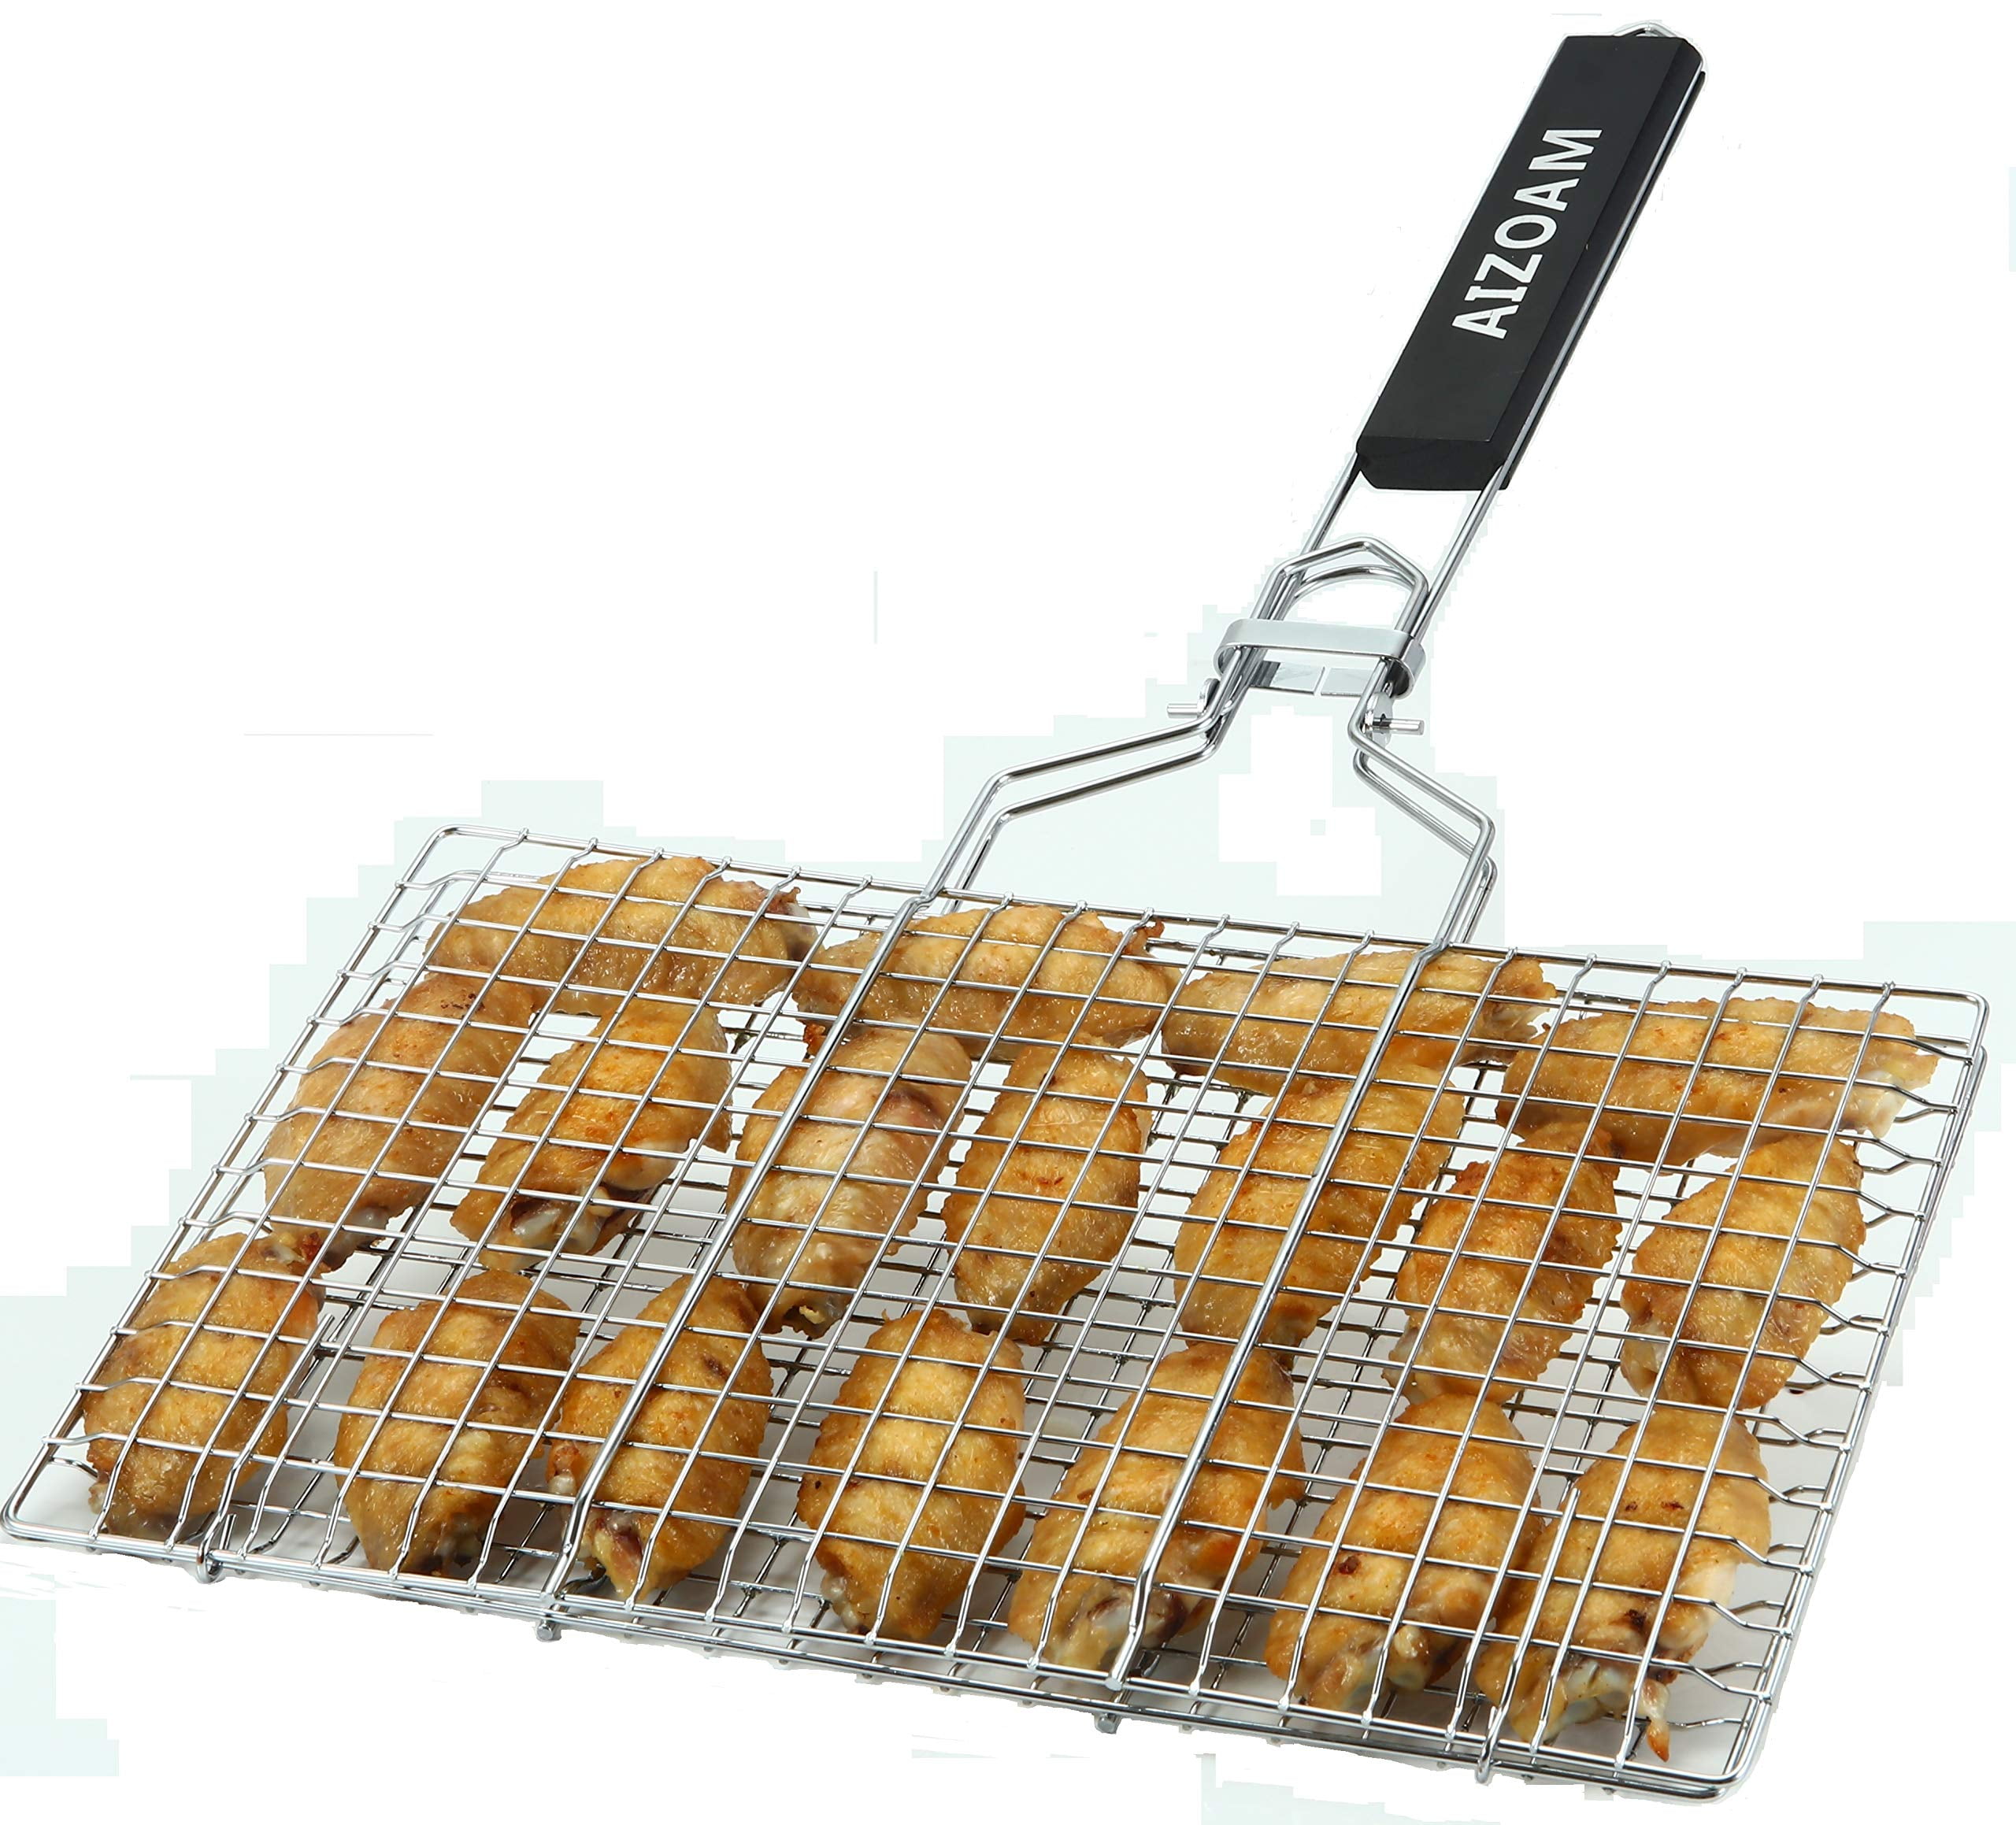 Portable BBQ Grilling Basket Stainless Steel Nonstick Tools Grill Mesh 